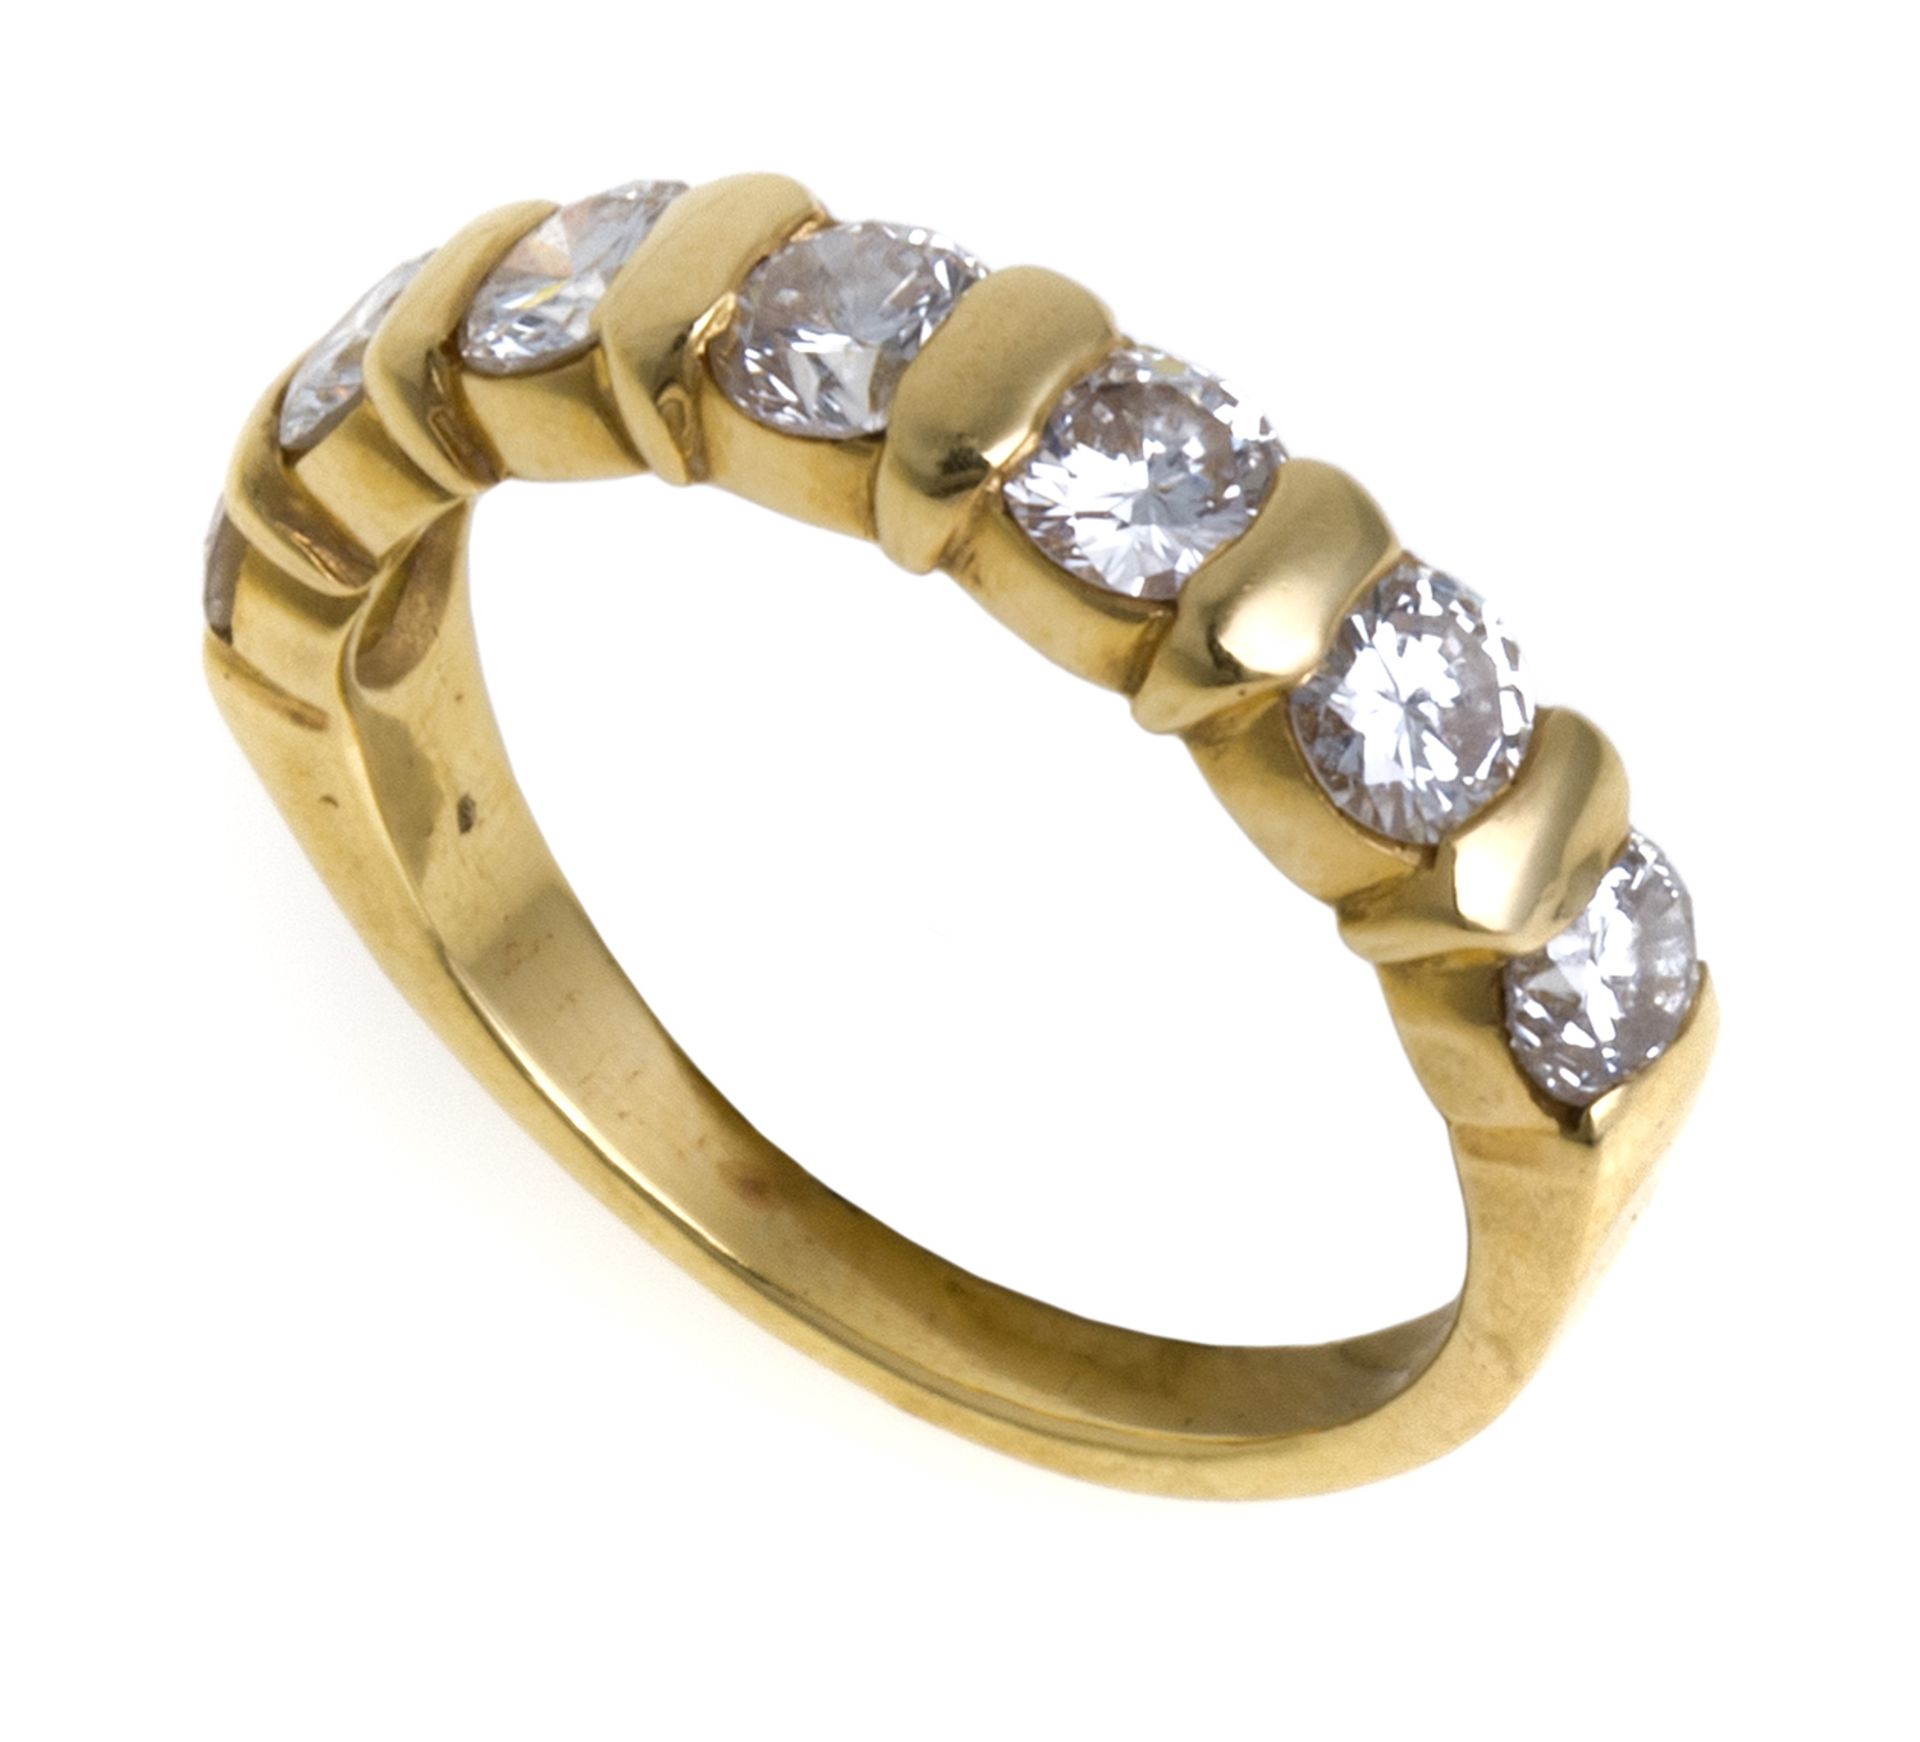 GOLD RIVIERE RING